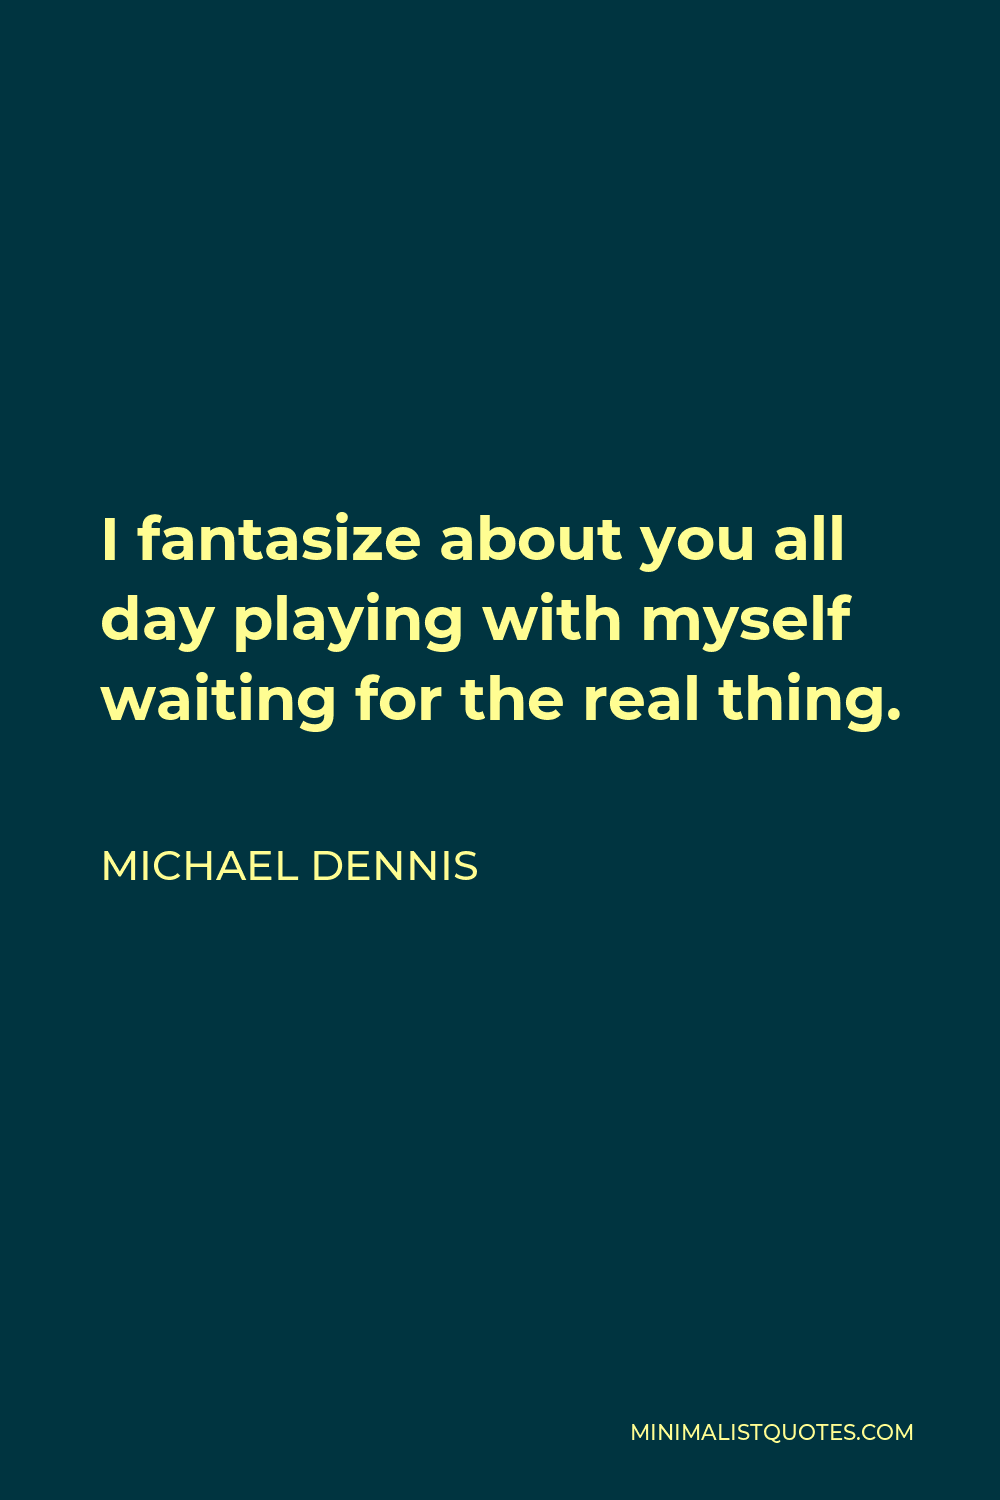 Michael Dennis Quote - I fantasize about you all day playing with myself waiting for the real thing.